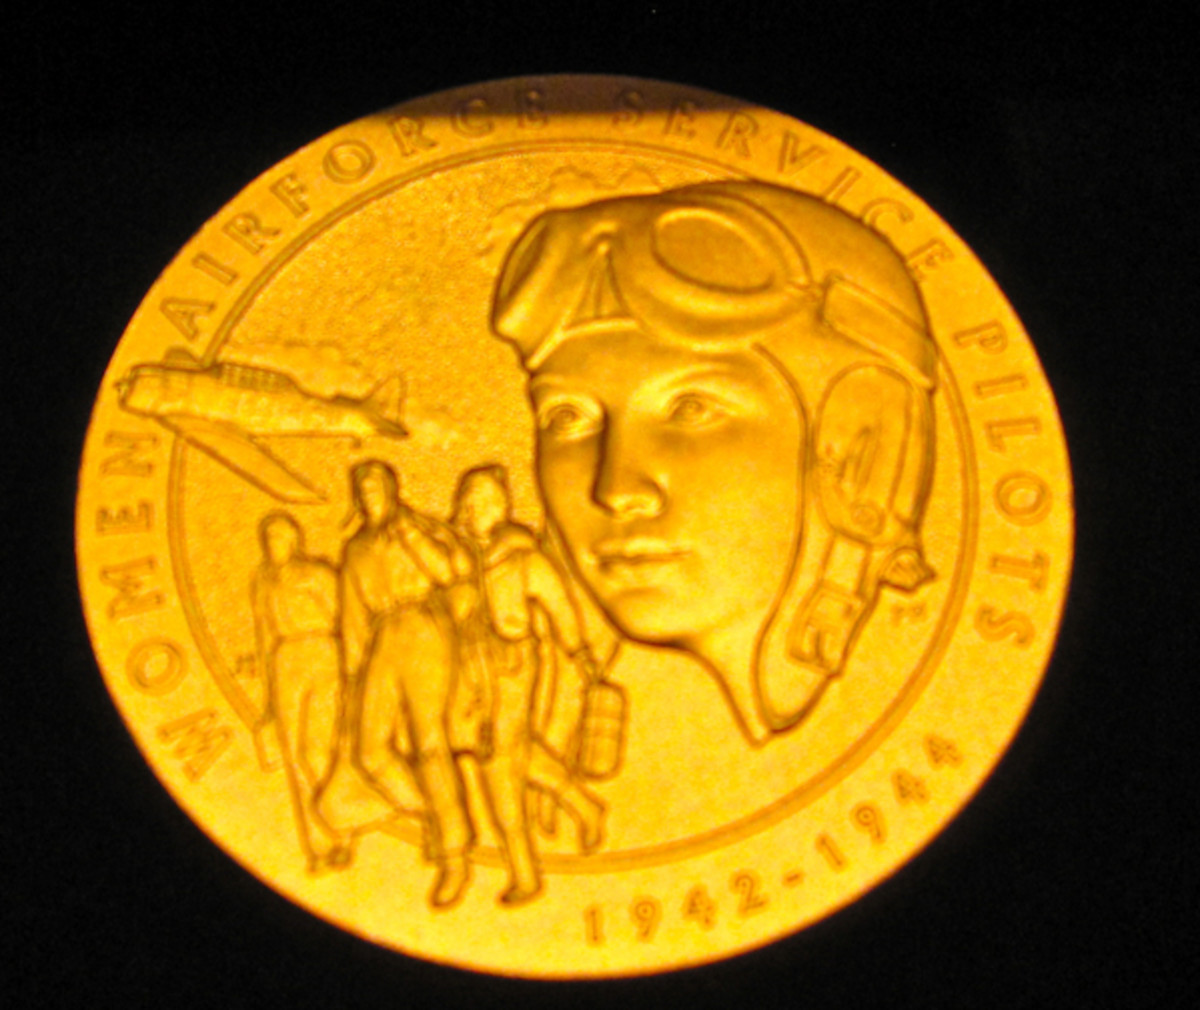 Congressional Gold Medal, bestowed to Women Air Force Service Pilots, 